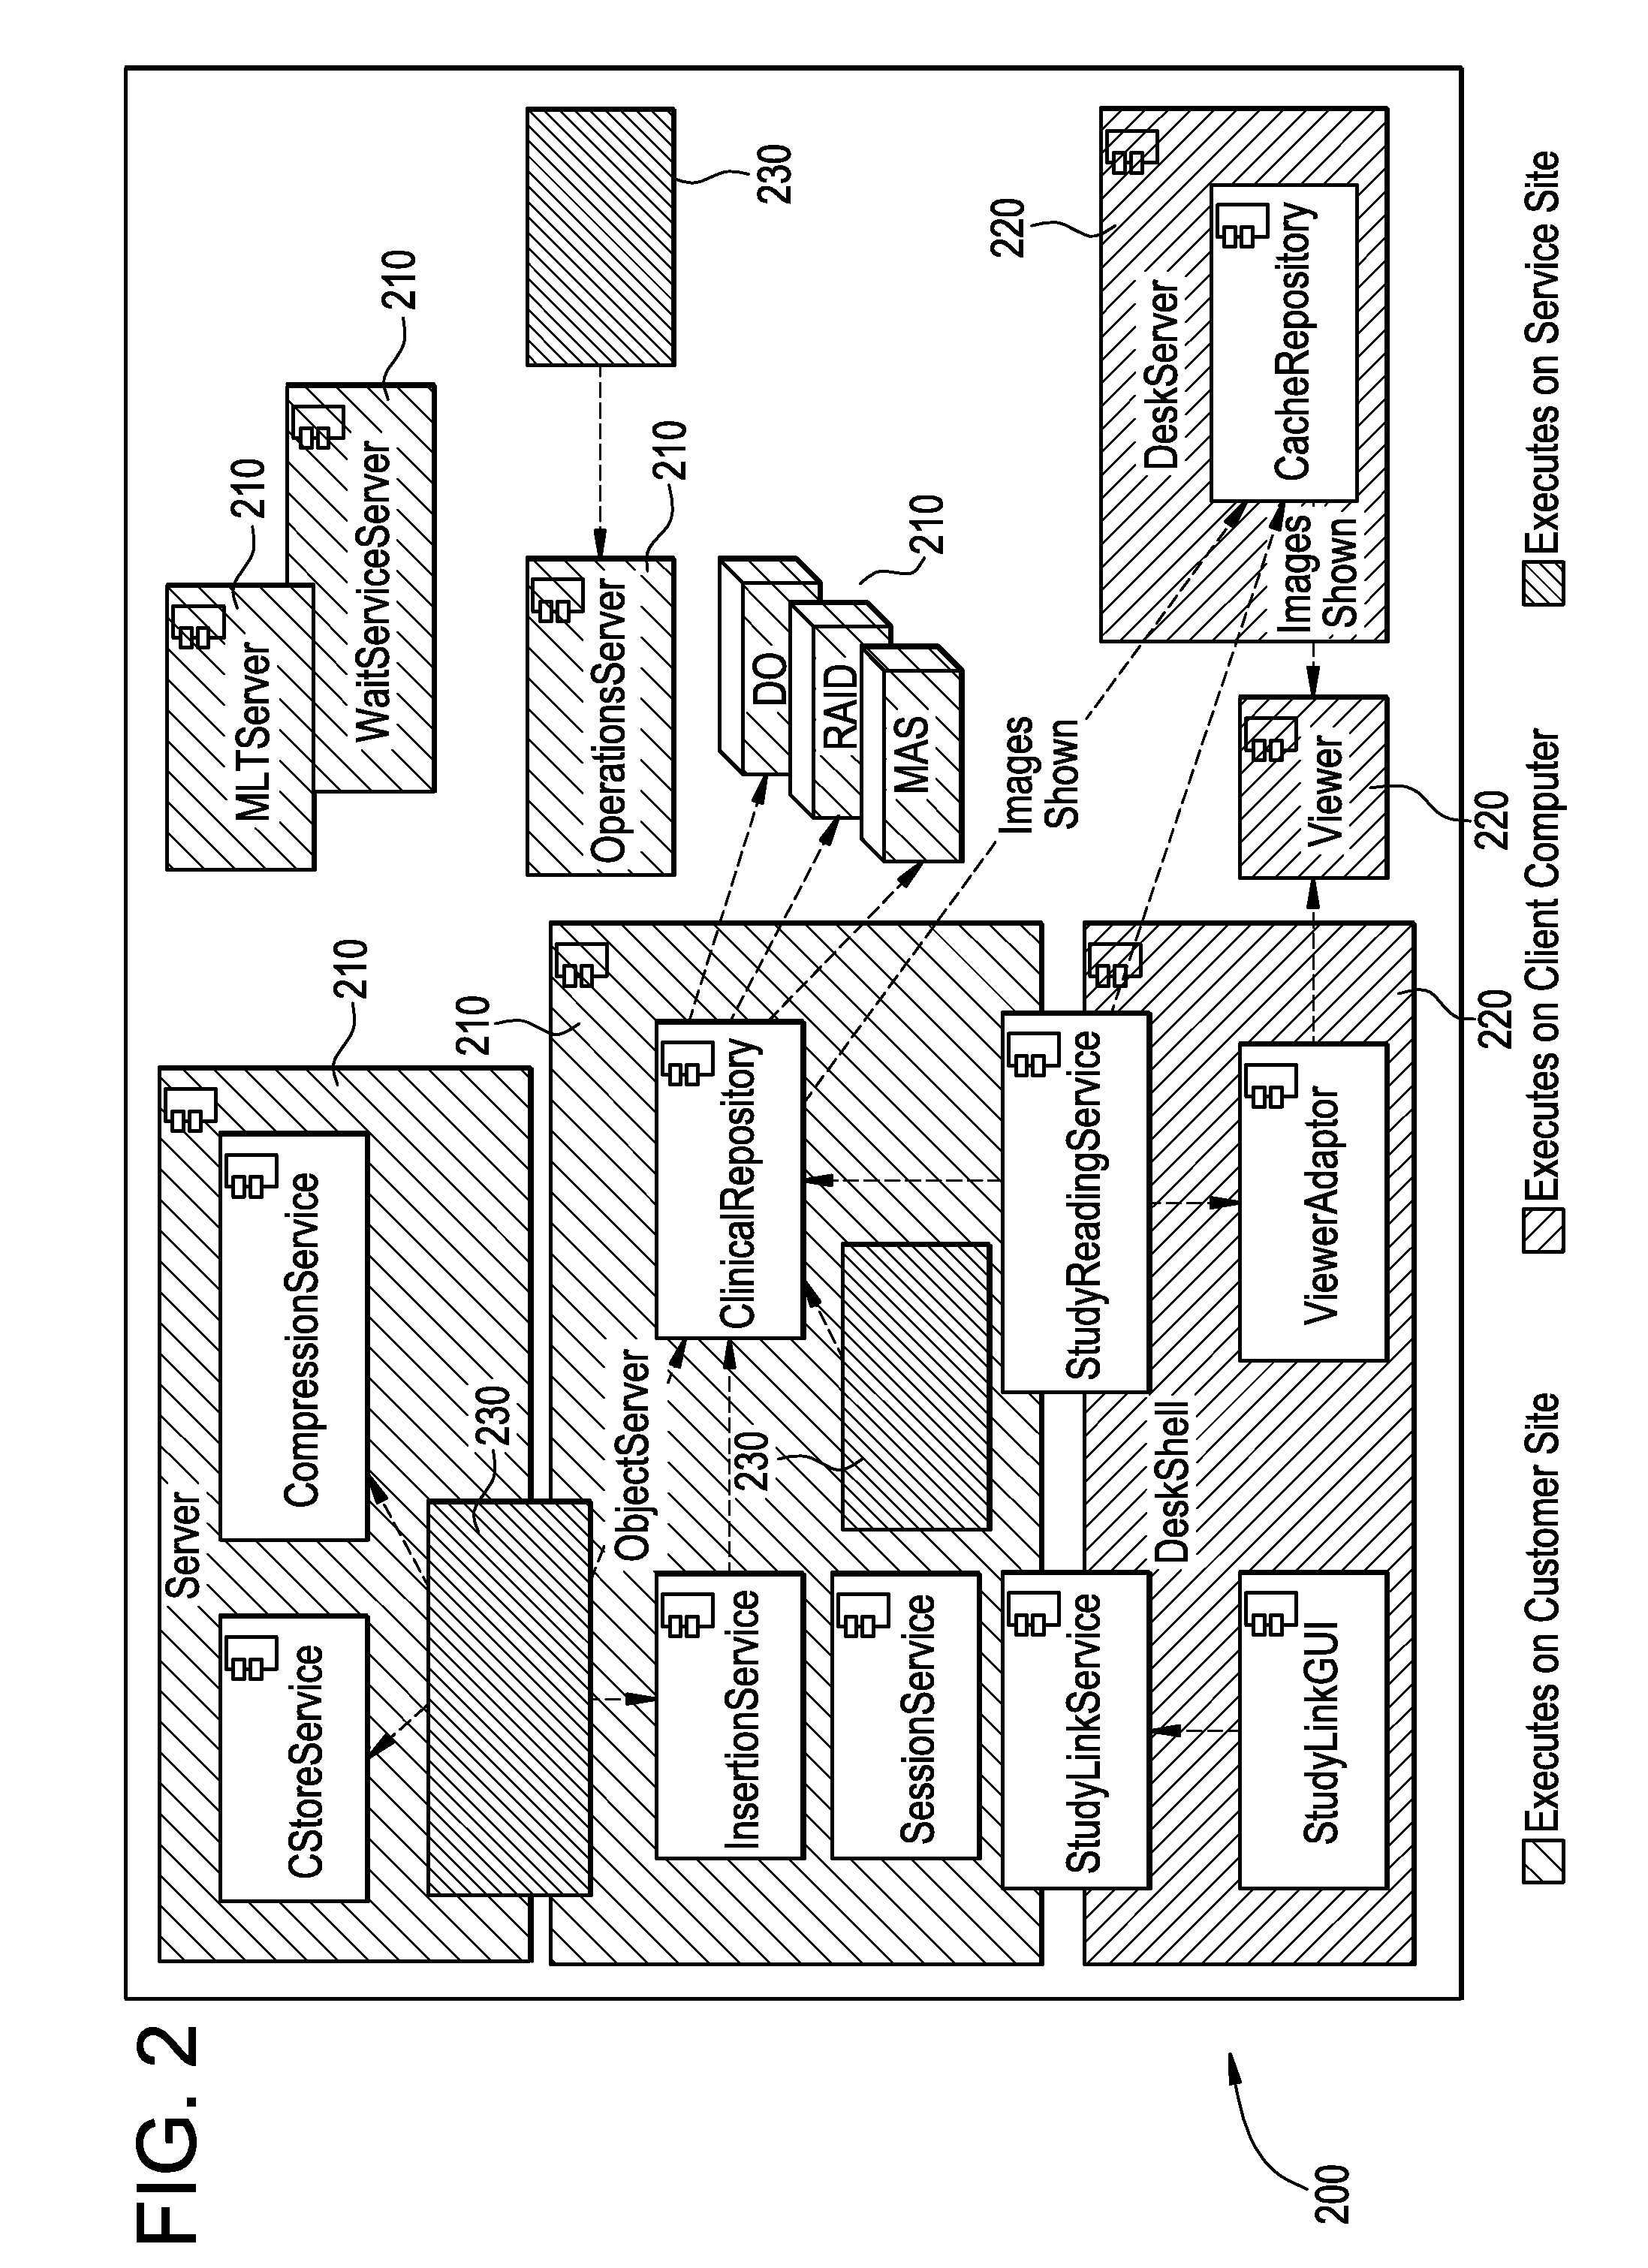 Systems and methods for adaptive workflow and resource prioritization